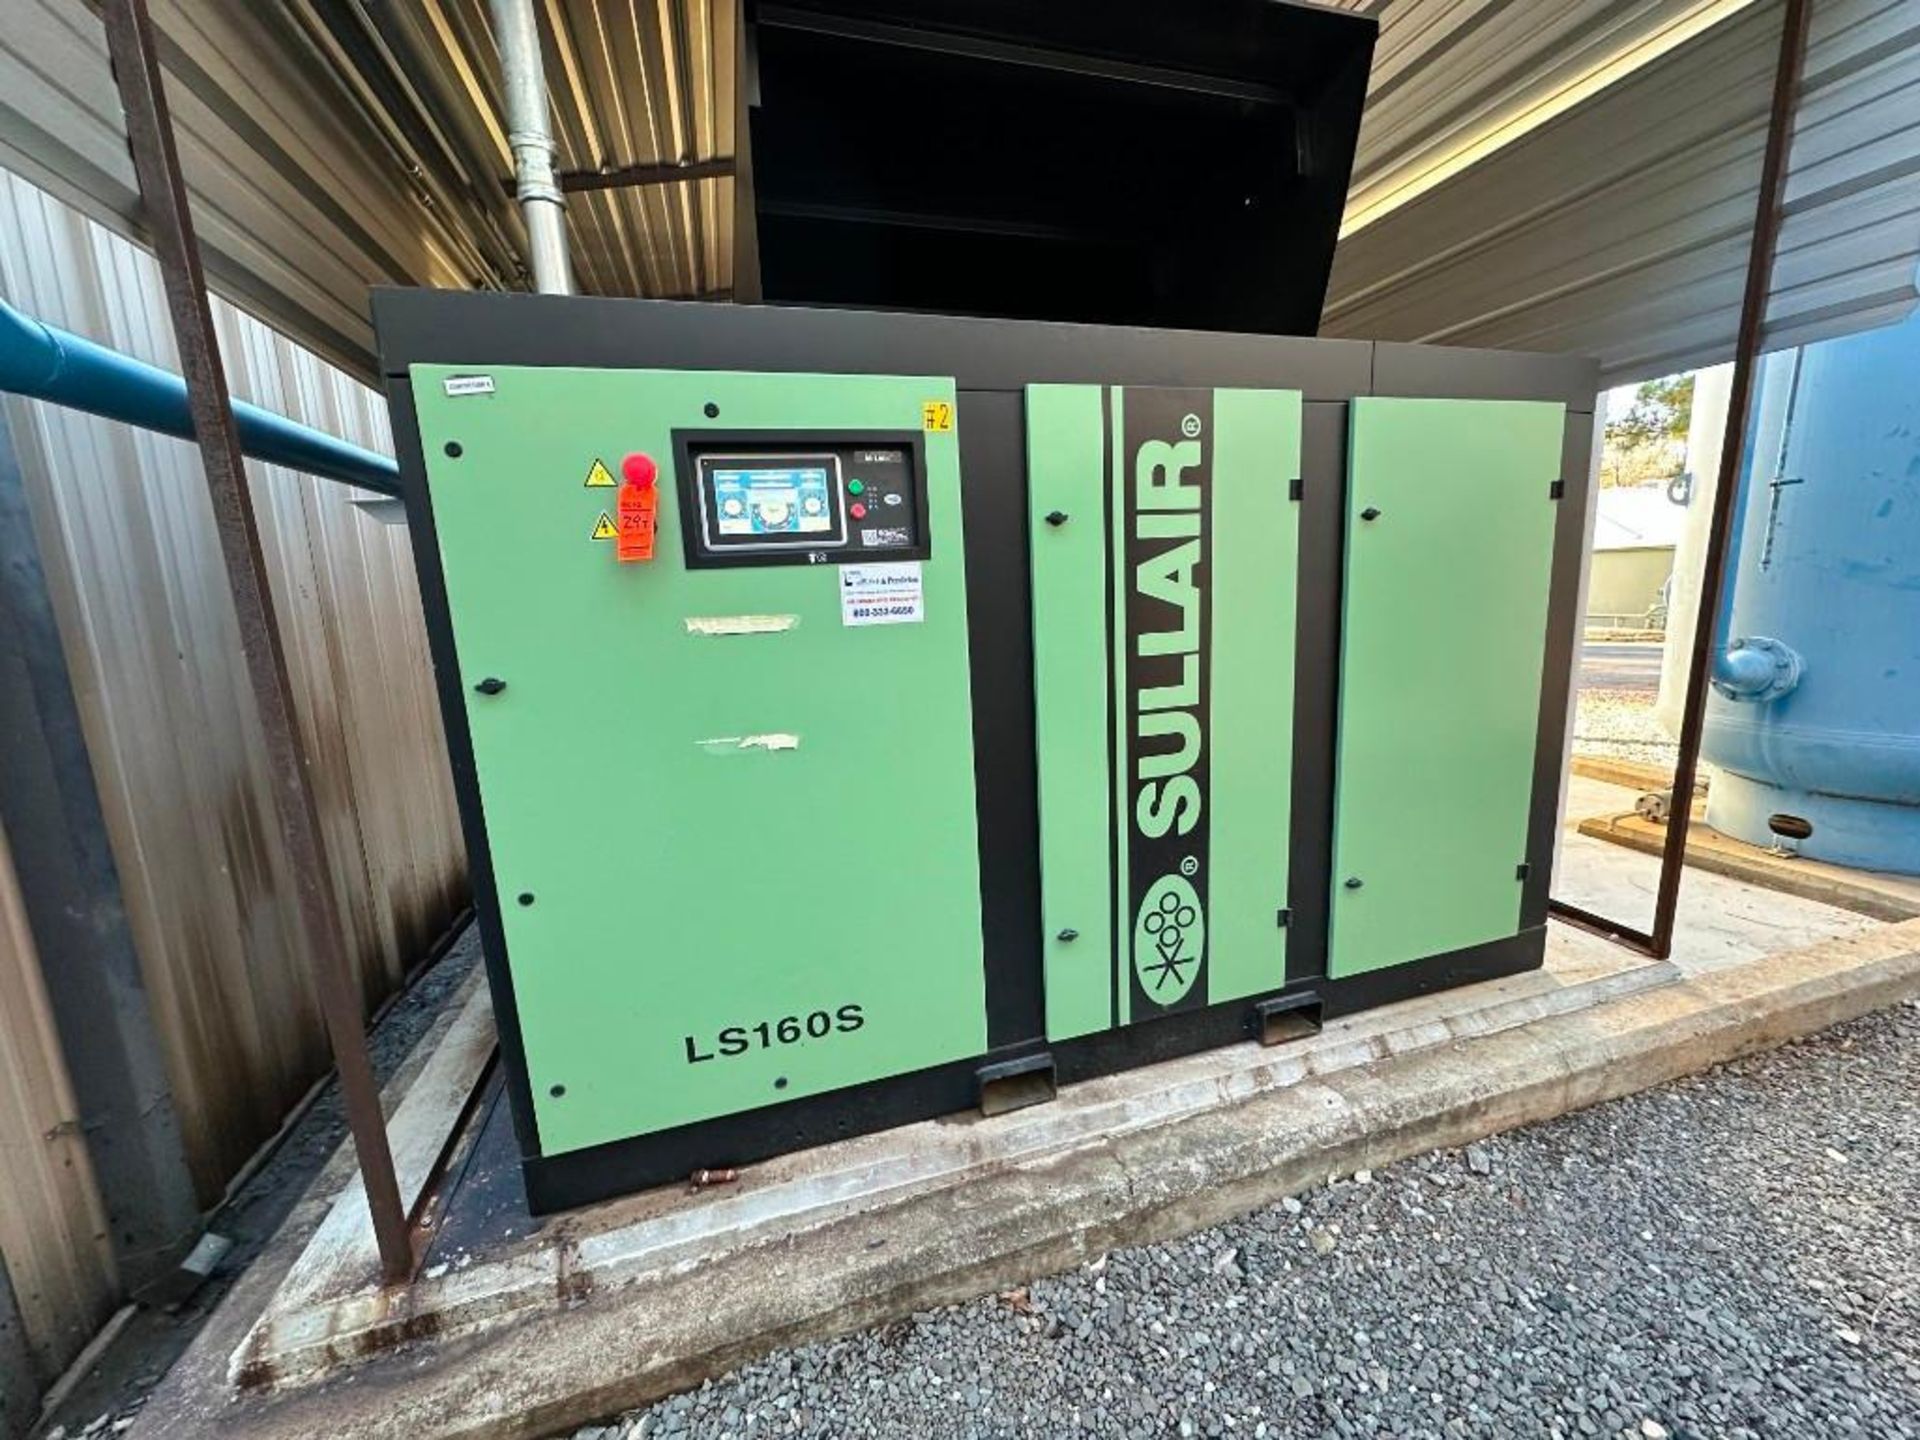 2022 Sullair LS-160S rotary screw air compressor (OUTSIDE BACK OF BOILER ROOM)